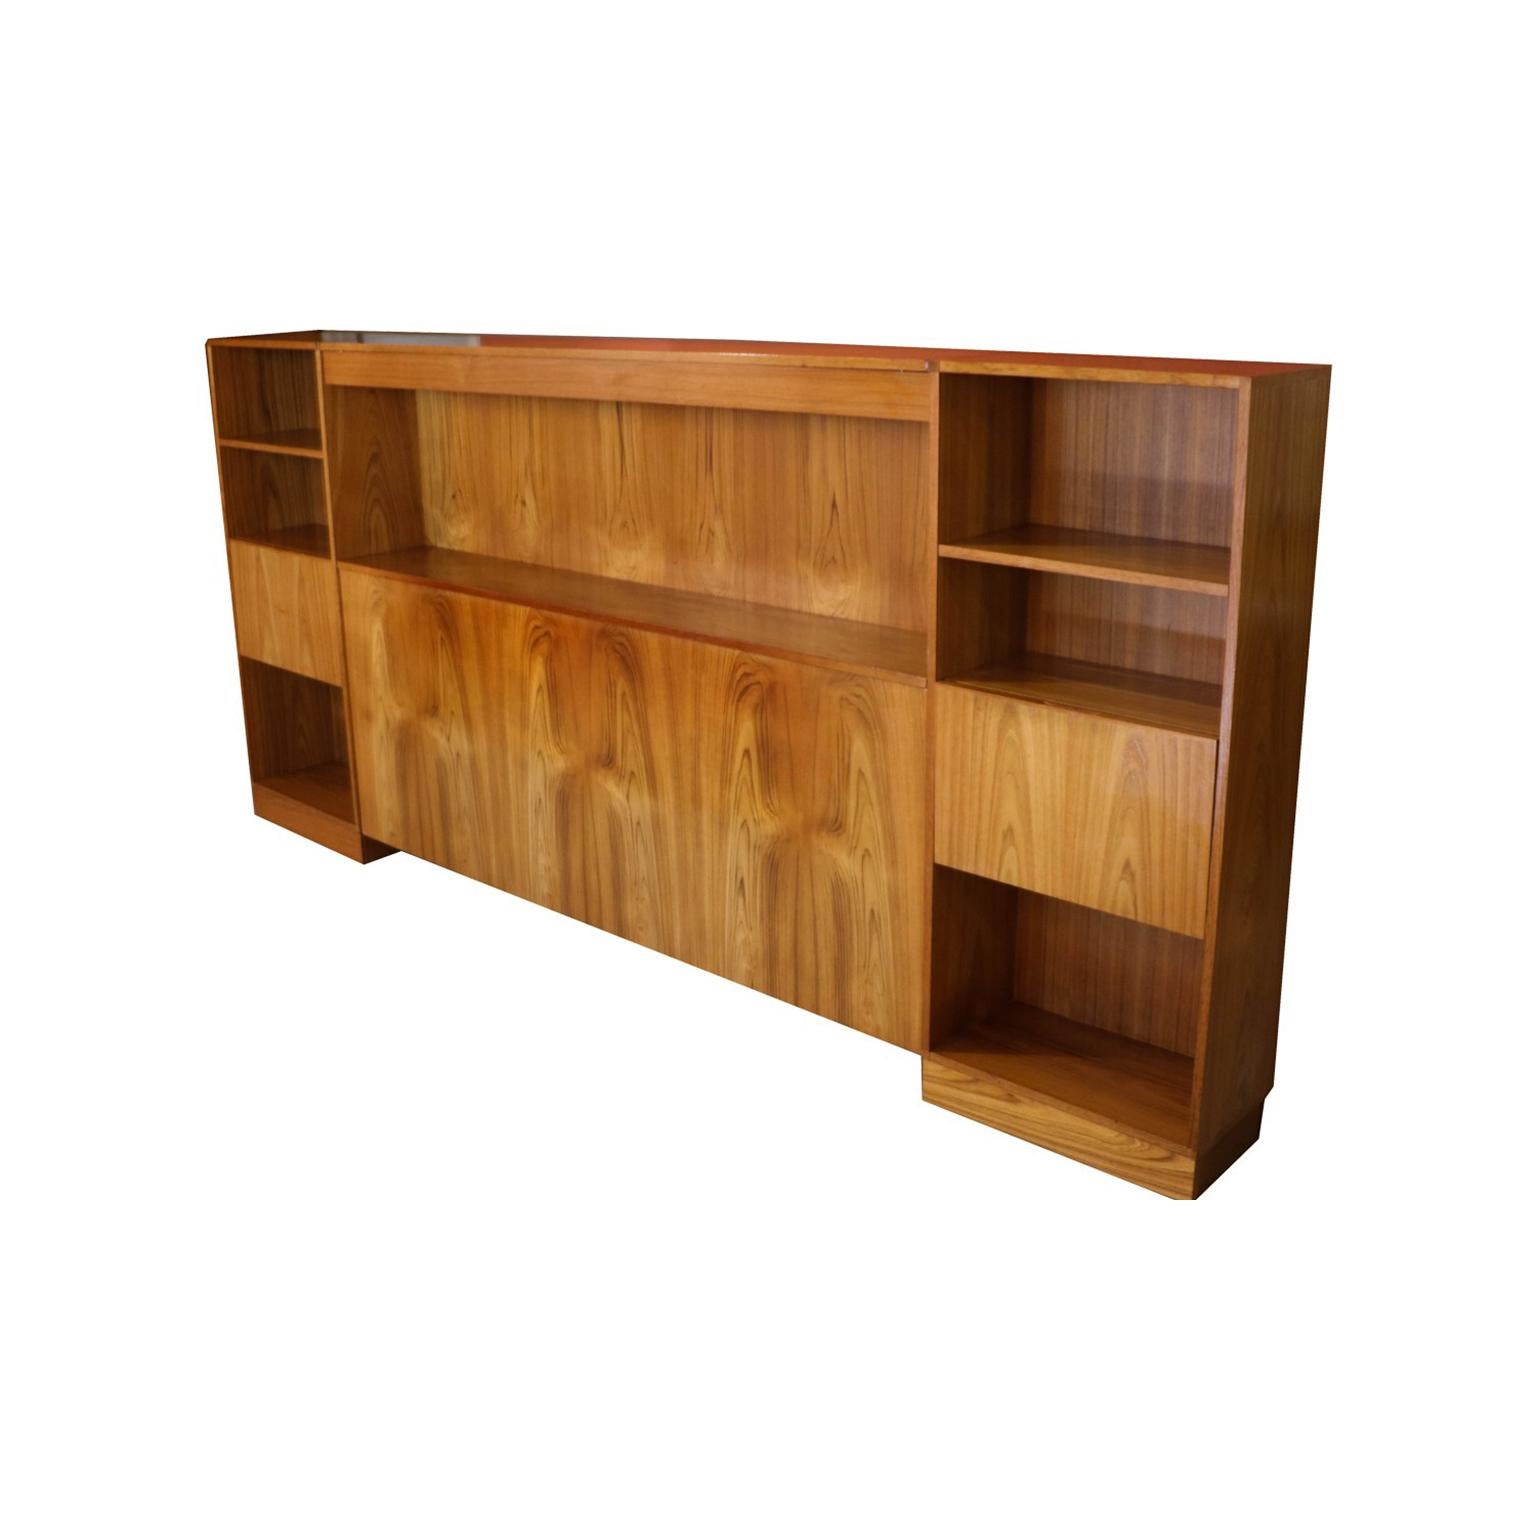 Gorgeous Scandinavian teak queen-size modular headboard with lighted bookshelf storage and nightstands, made in Denmark, circa 1970s. Features built in lighted center bookcase / shelf with two hidden reading lights on each side, eliminating the need